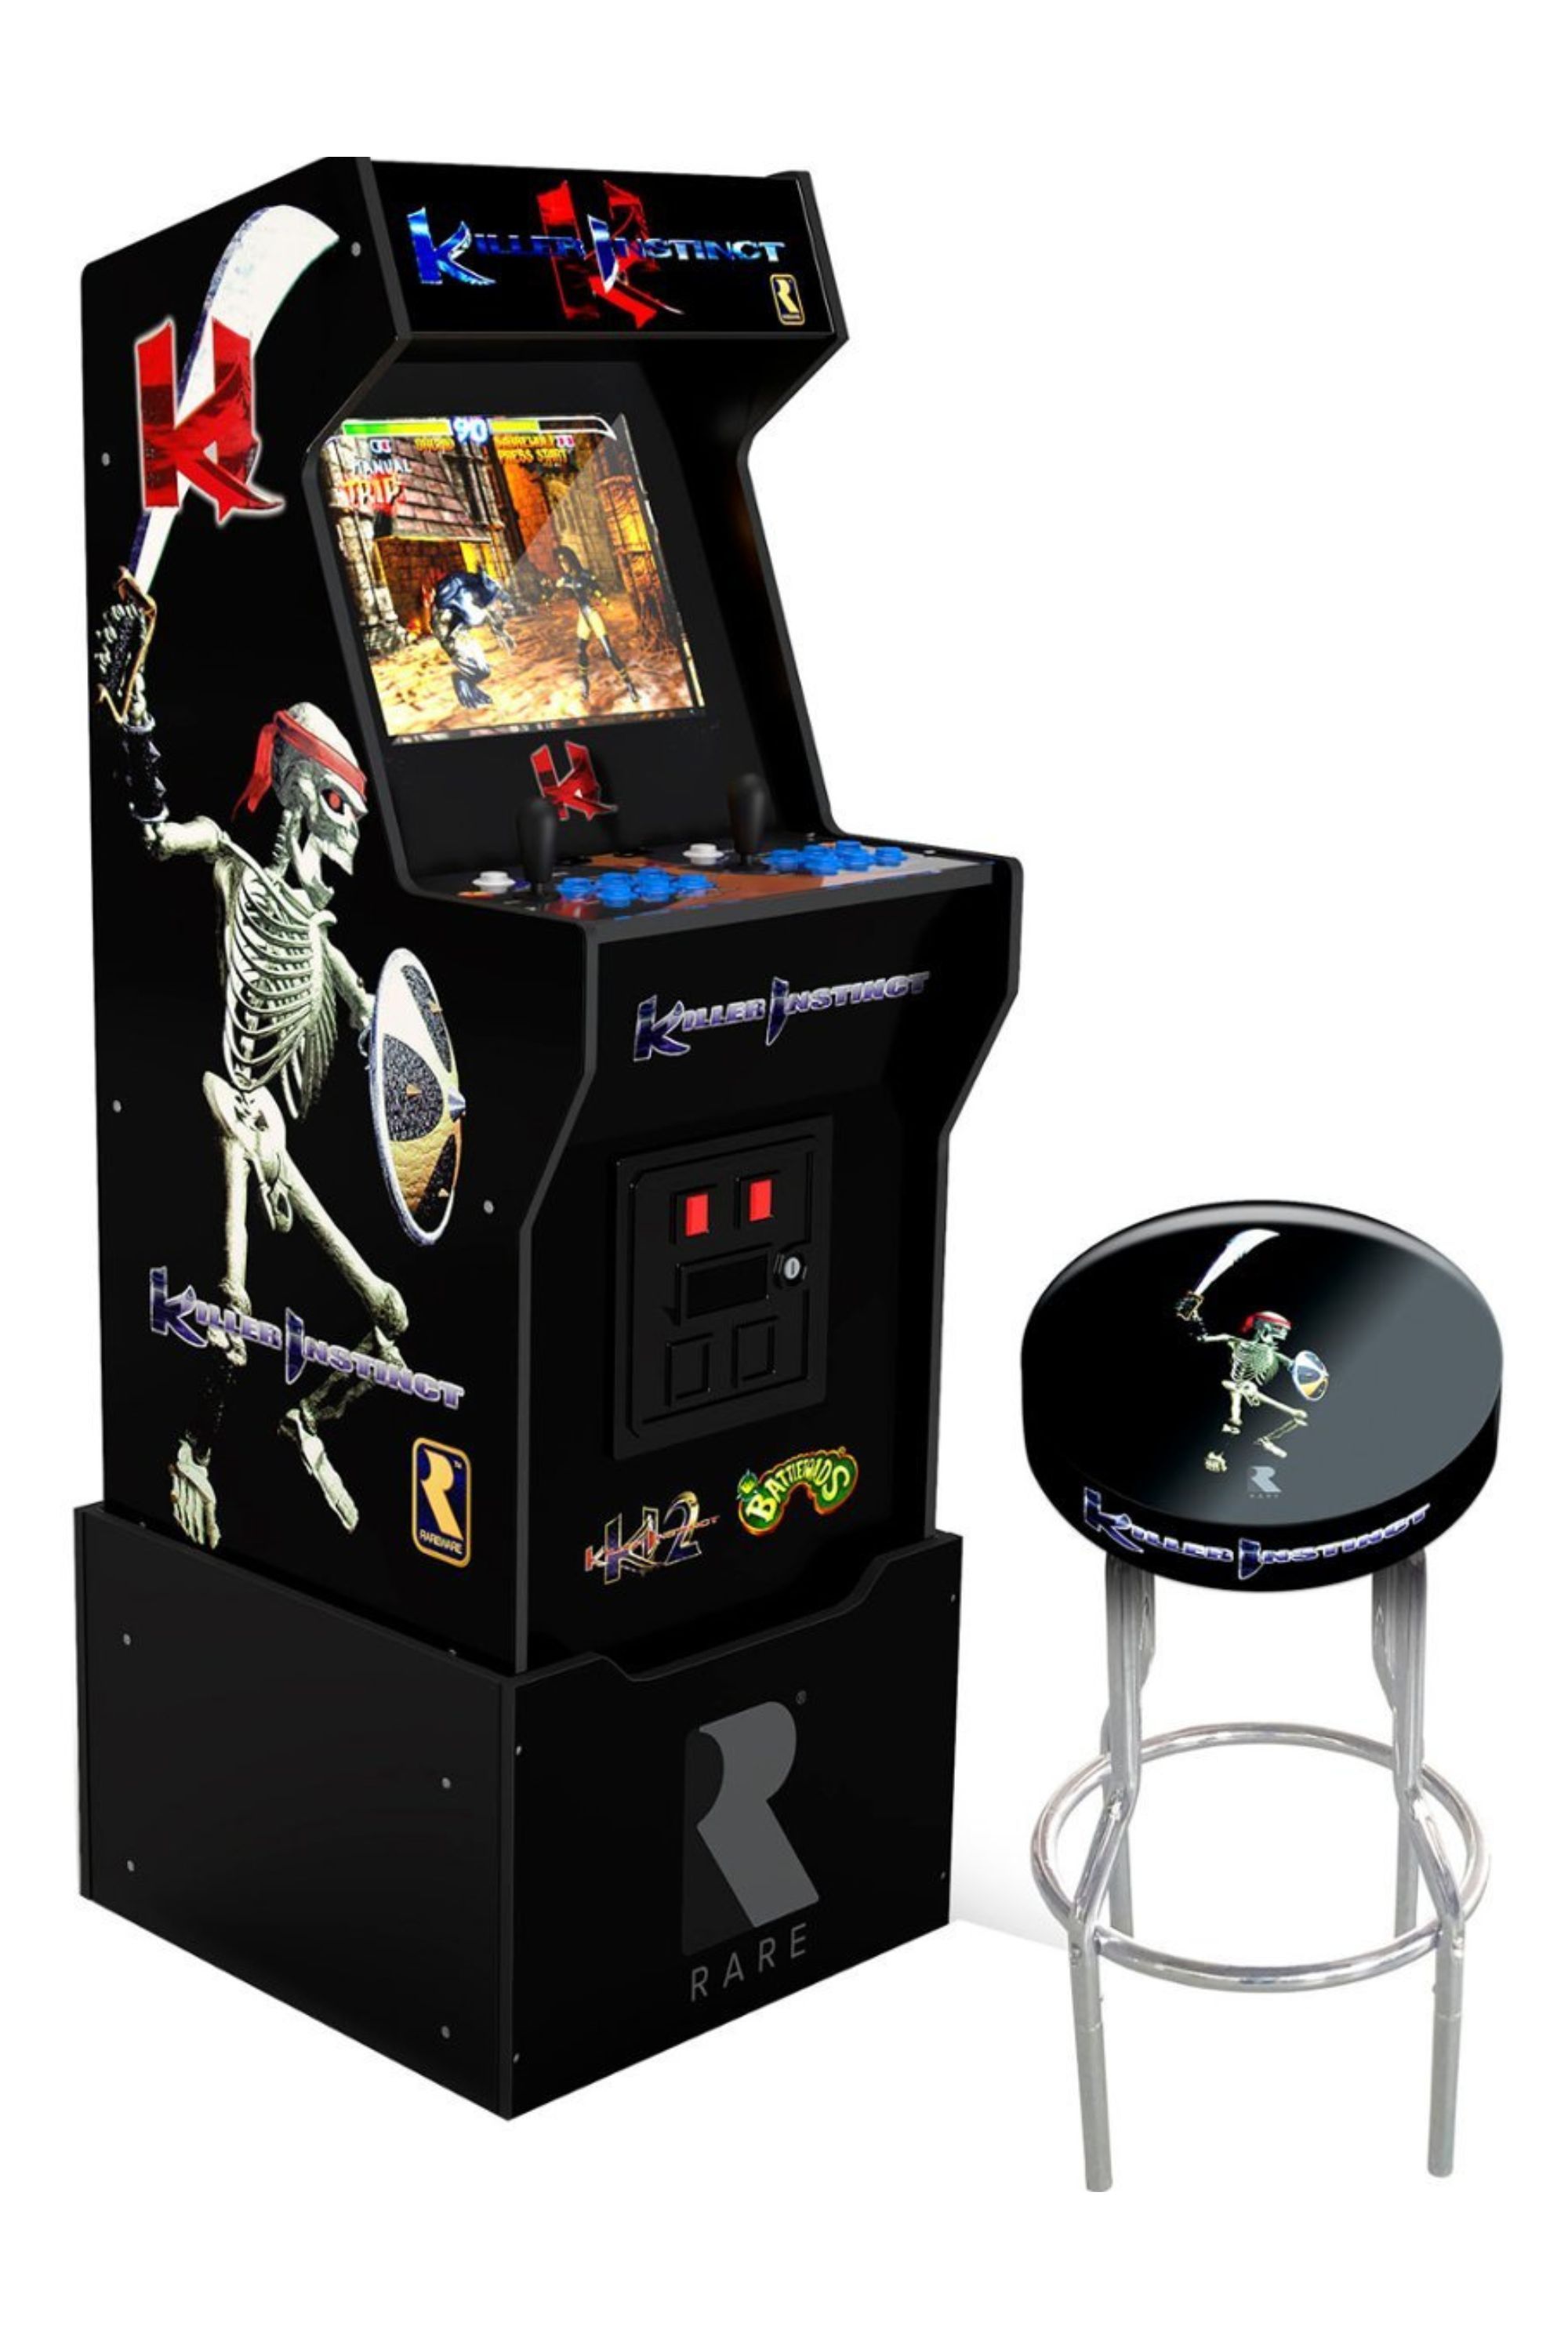 Product still for the Arcade1Up Killer Instinct Arcade with Stool, Riser, Lit Deck & Lit Marquee